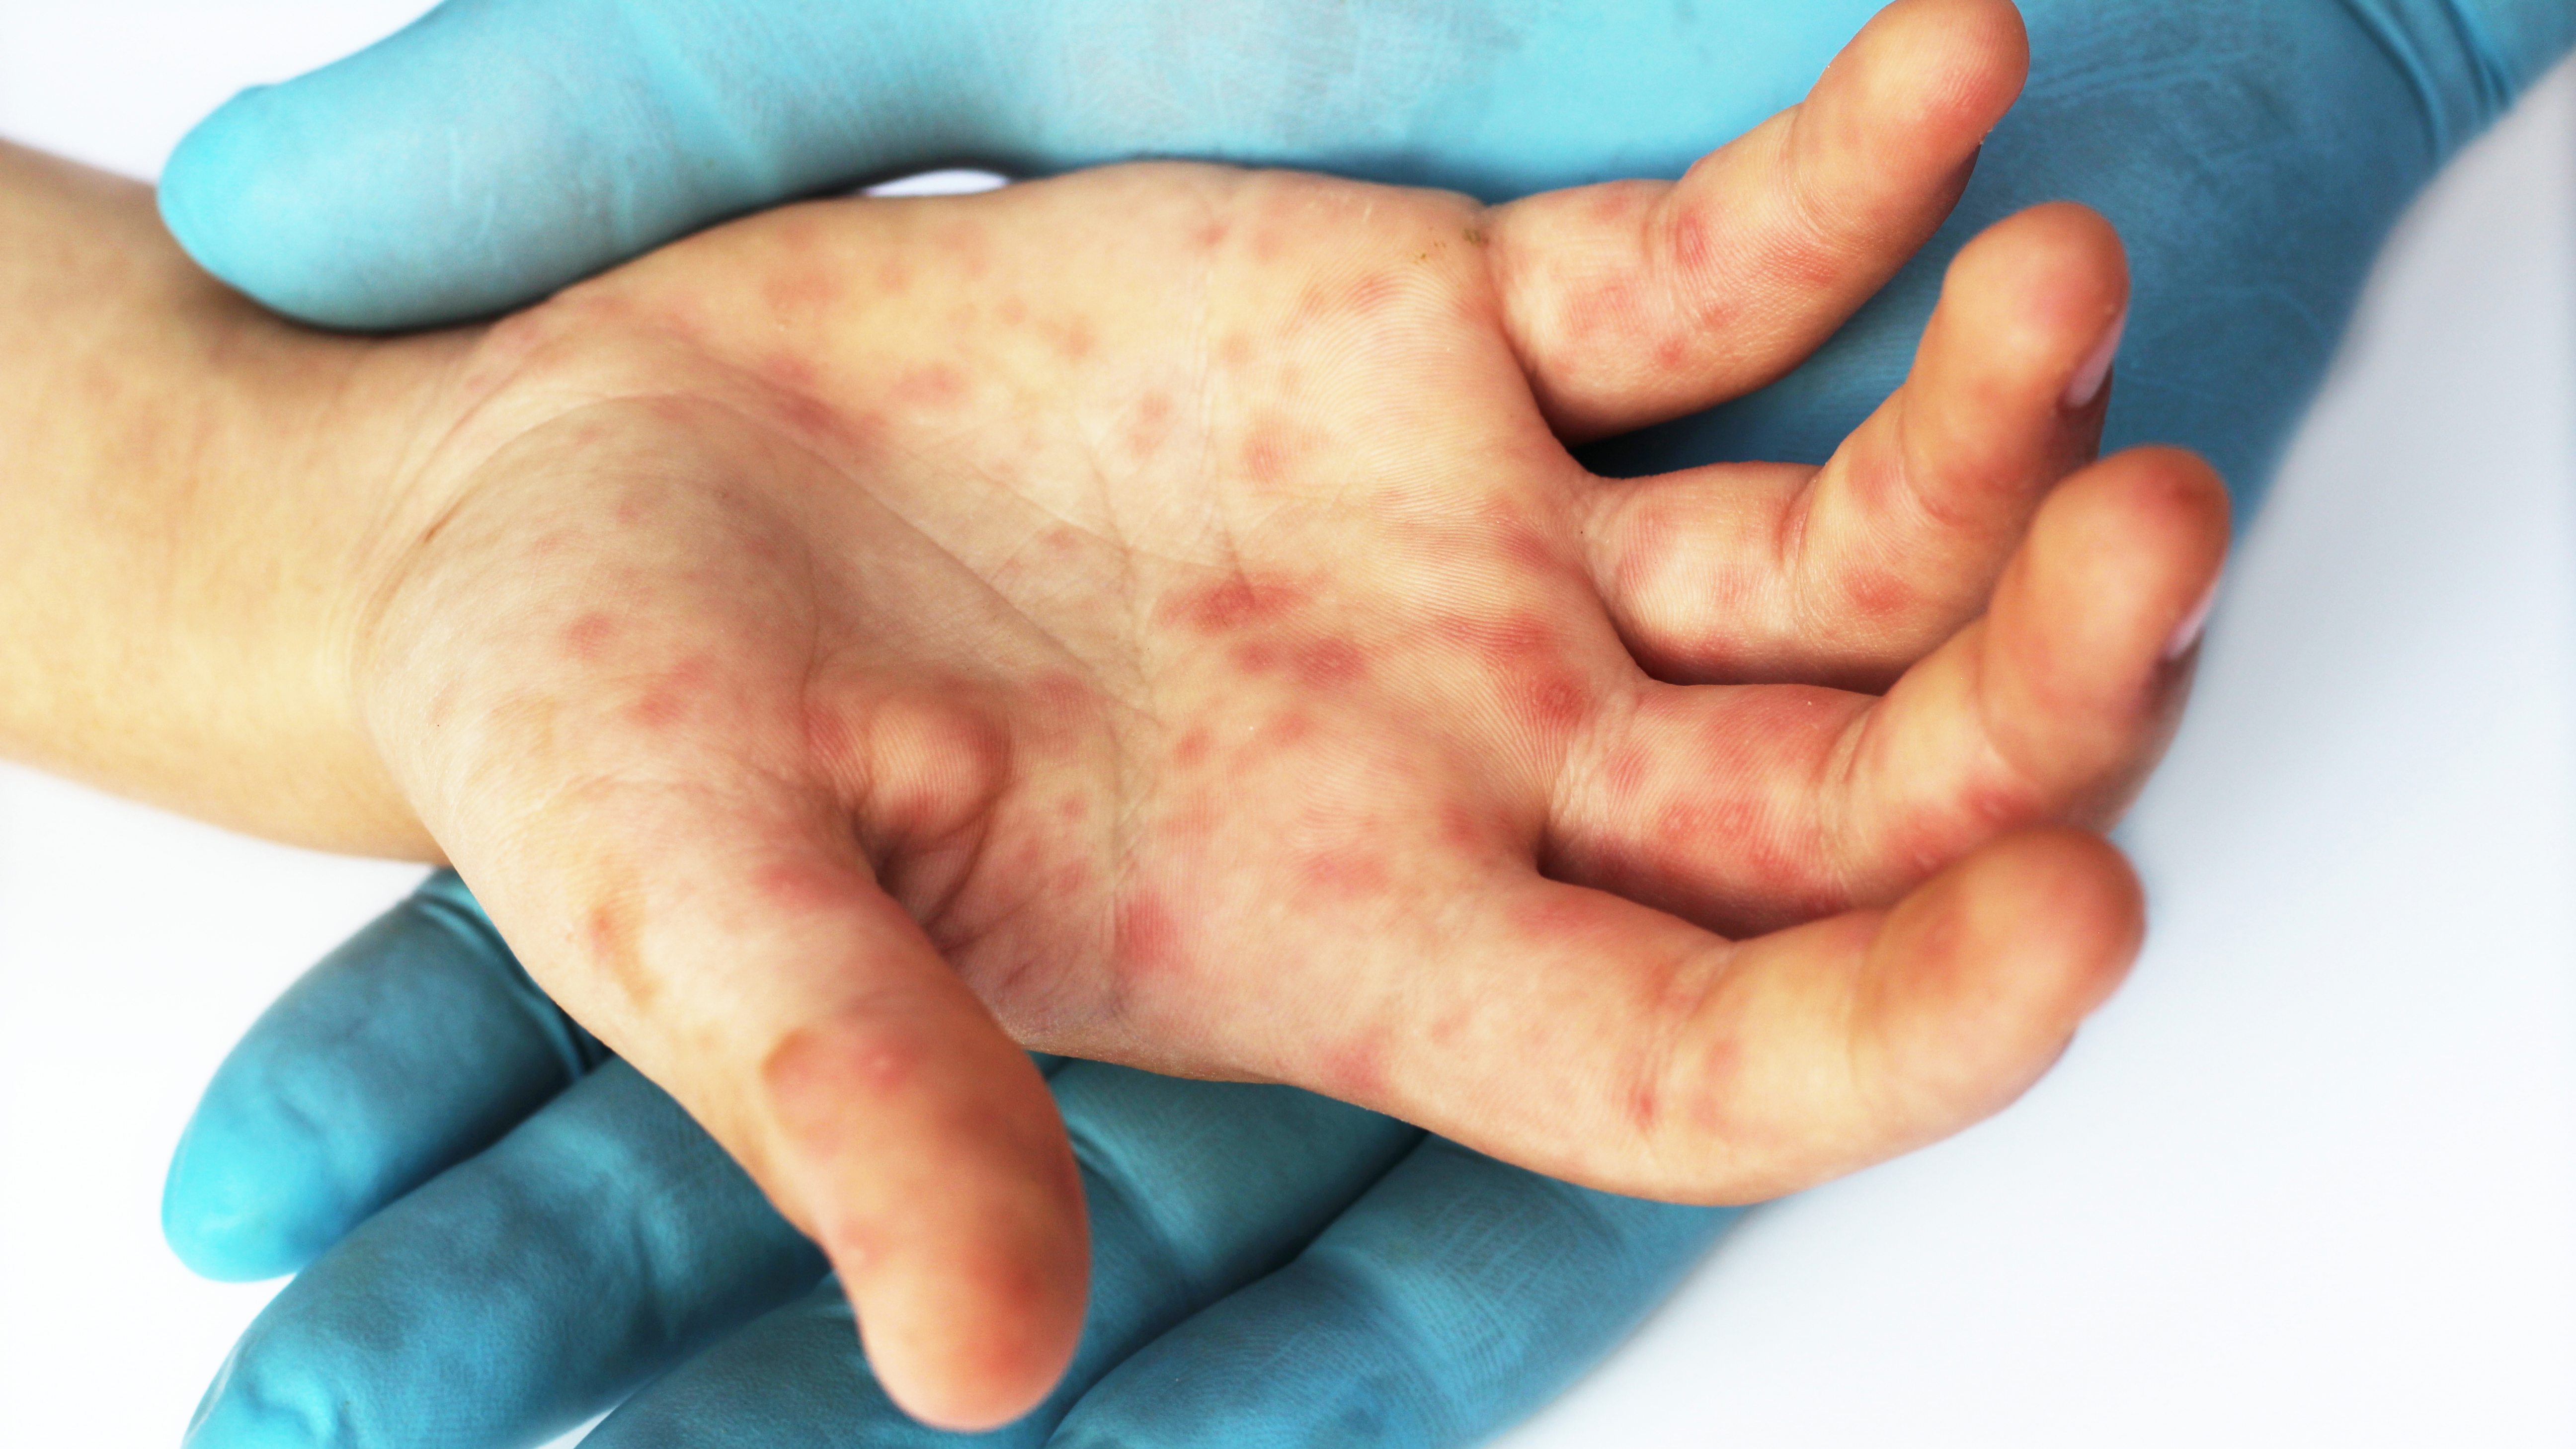 red spots and rash on infected hand with viral disease, perhaps hand foot and mouth disease, an enterovirus